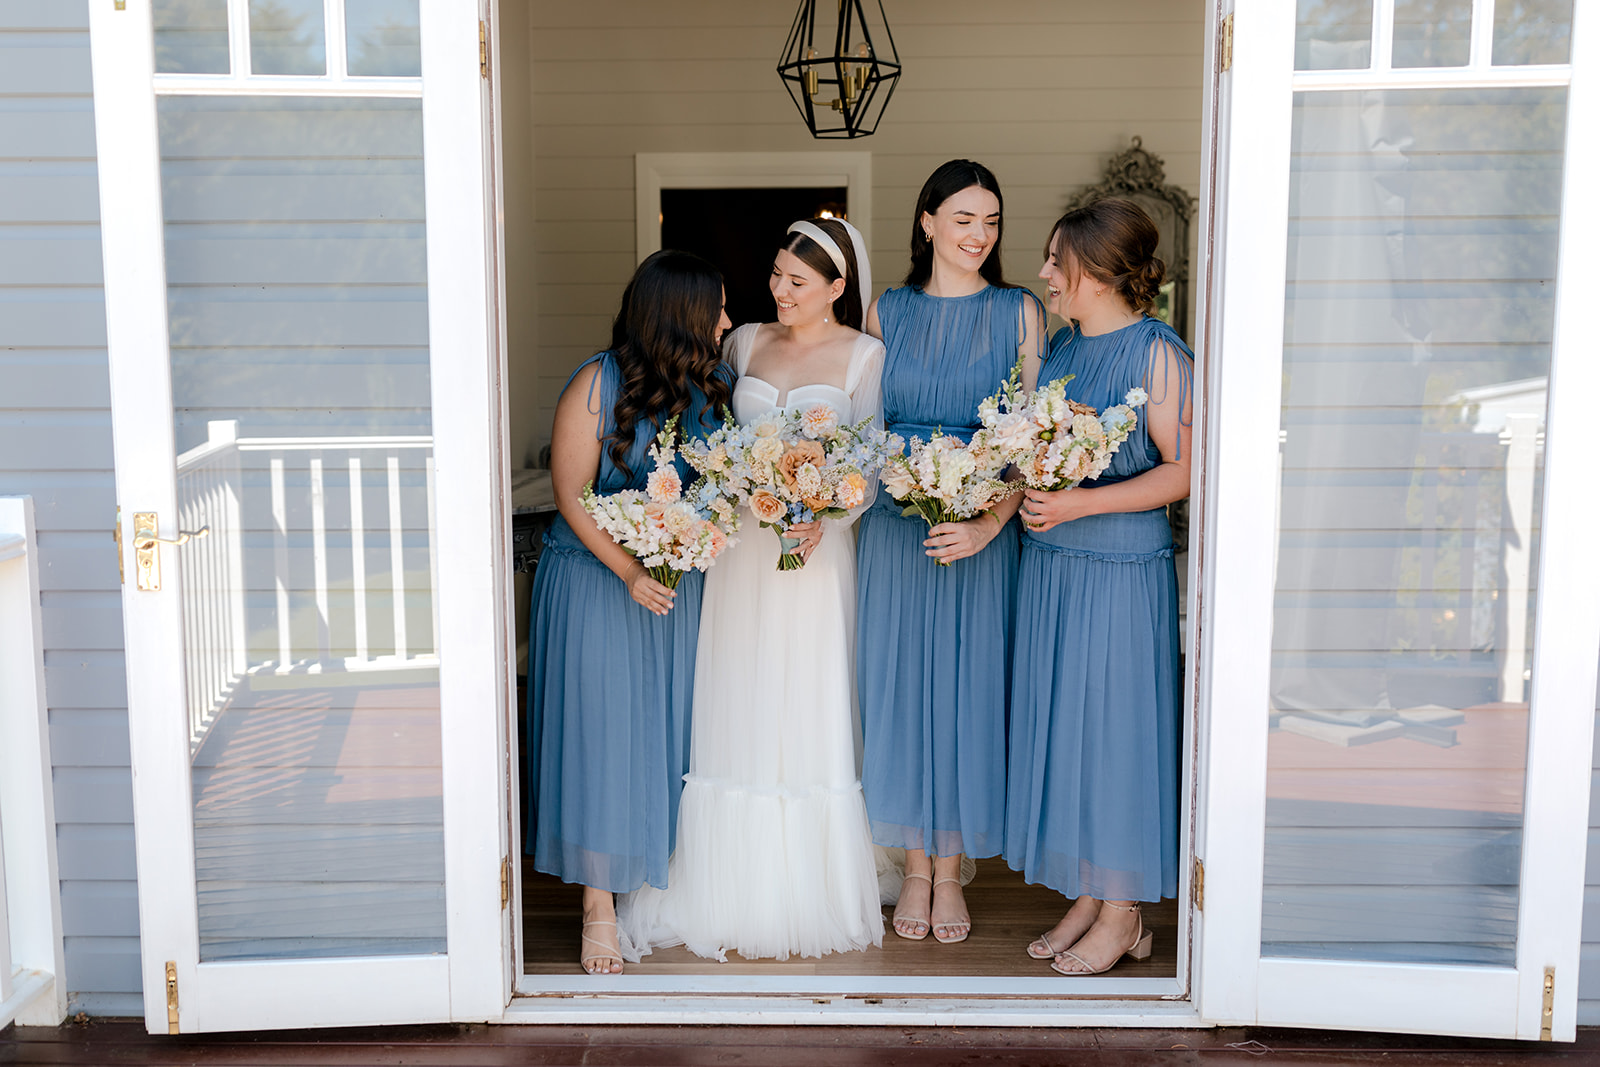 Bride with her bridesmaids holding their bridal bouquets before her elegant country wedding.